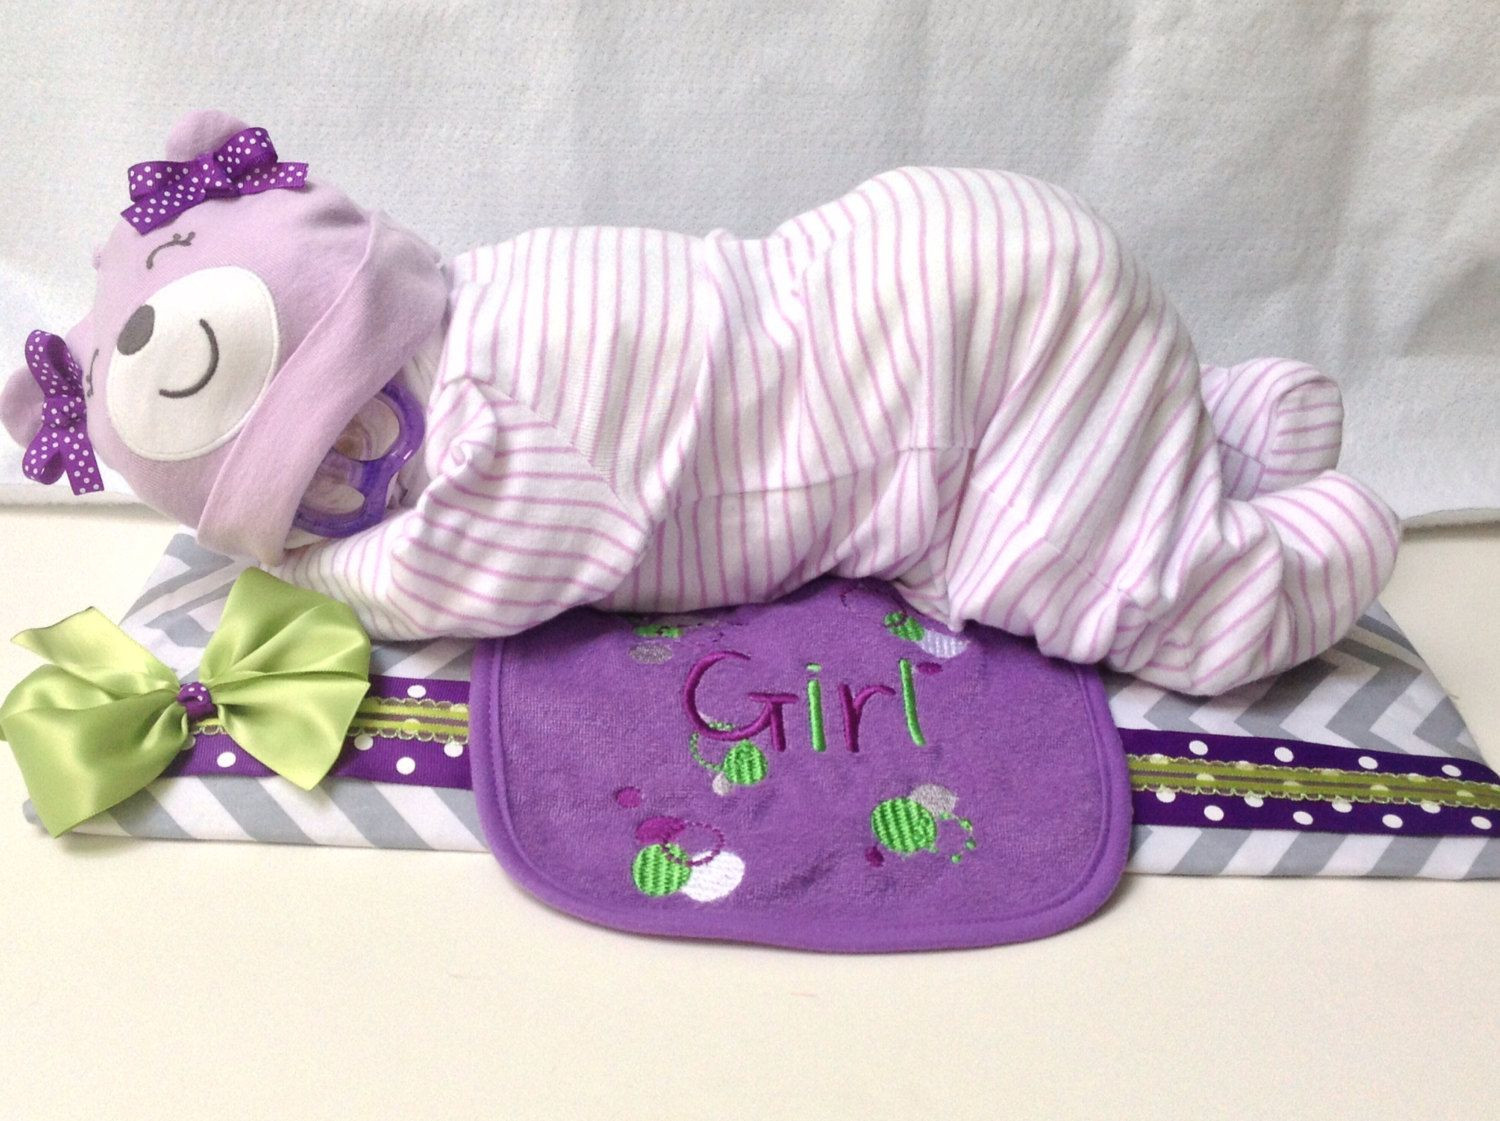 Baby Shower Gifts Made From Diapers
 Many people want to know how to make their own sleeping